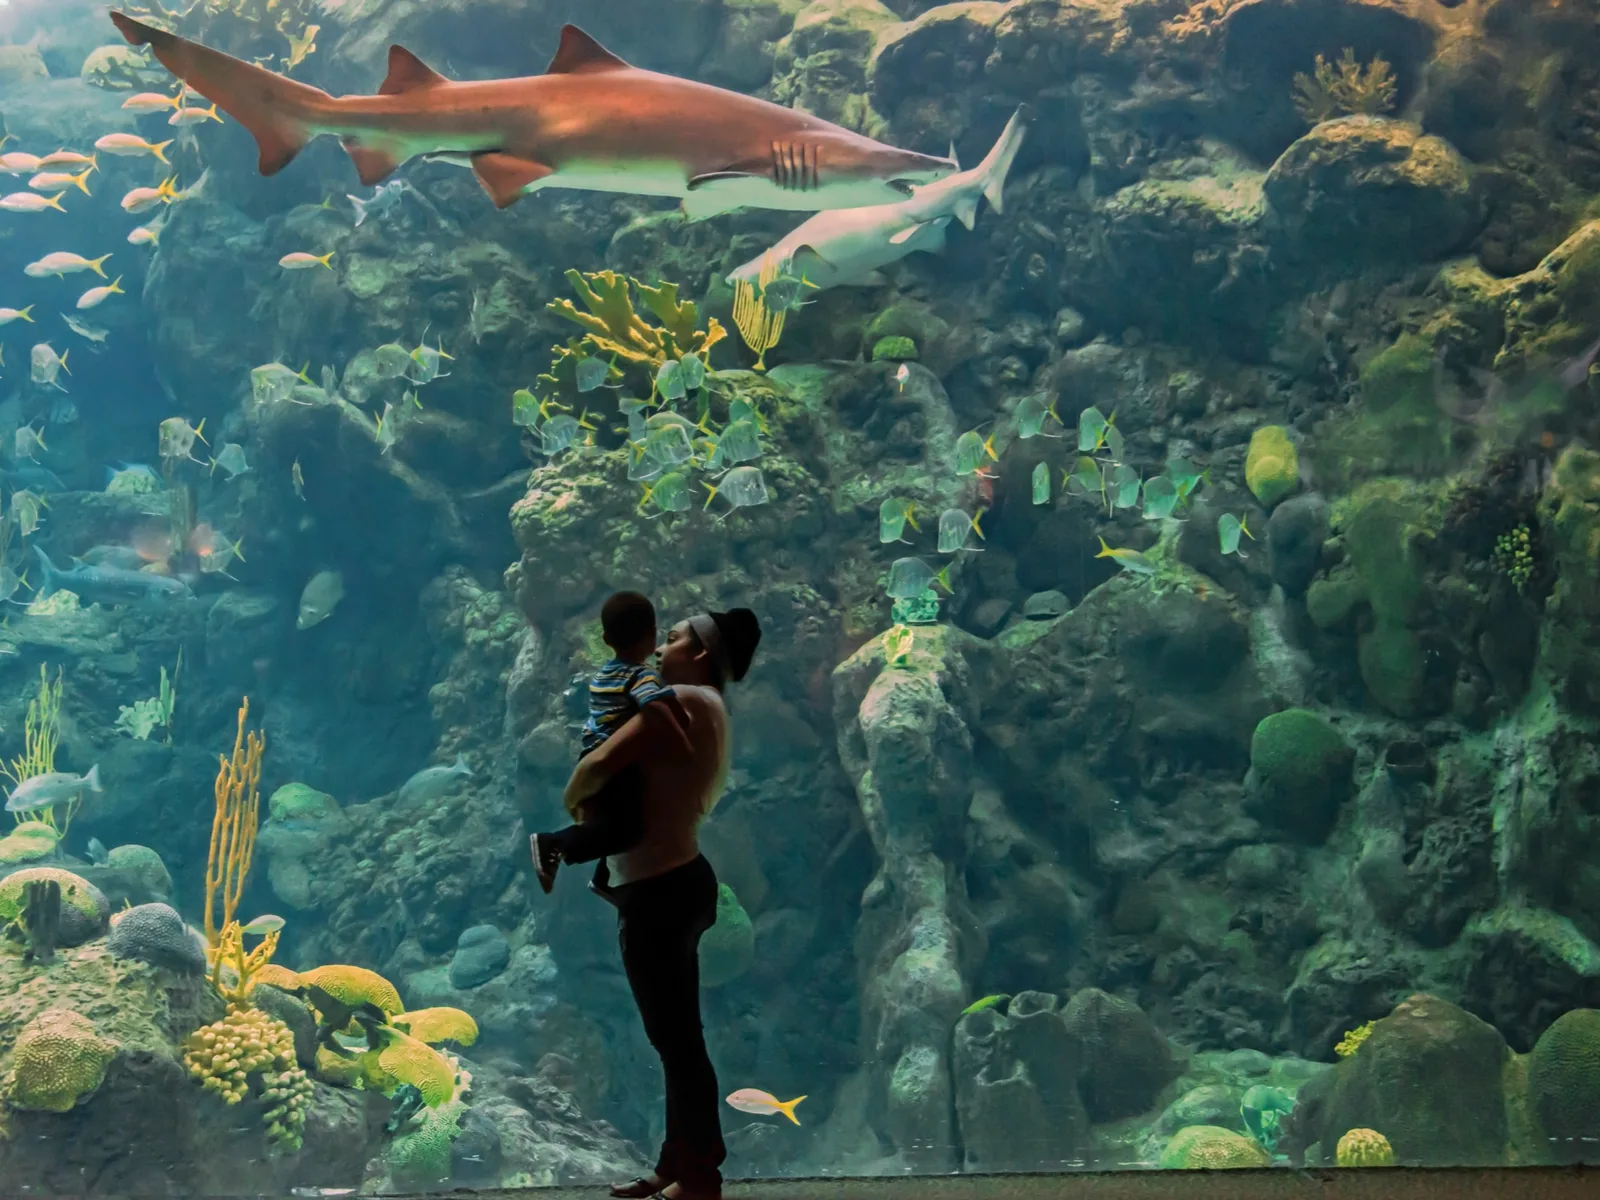 A mother carrying her toddler in front of the aquarium with two sharks and other fishes in the Florida Aquarium, named one of the best aquariums in the US